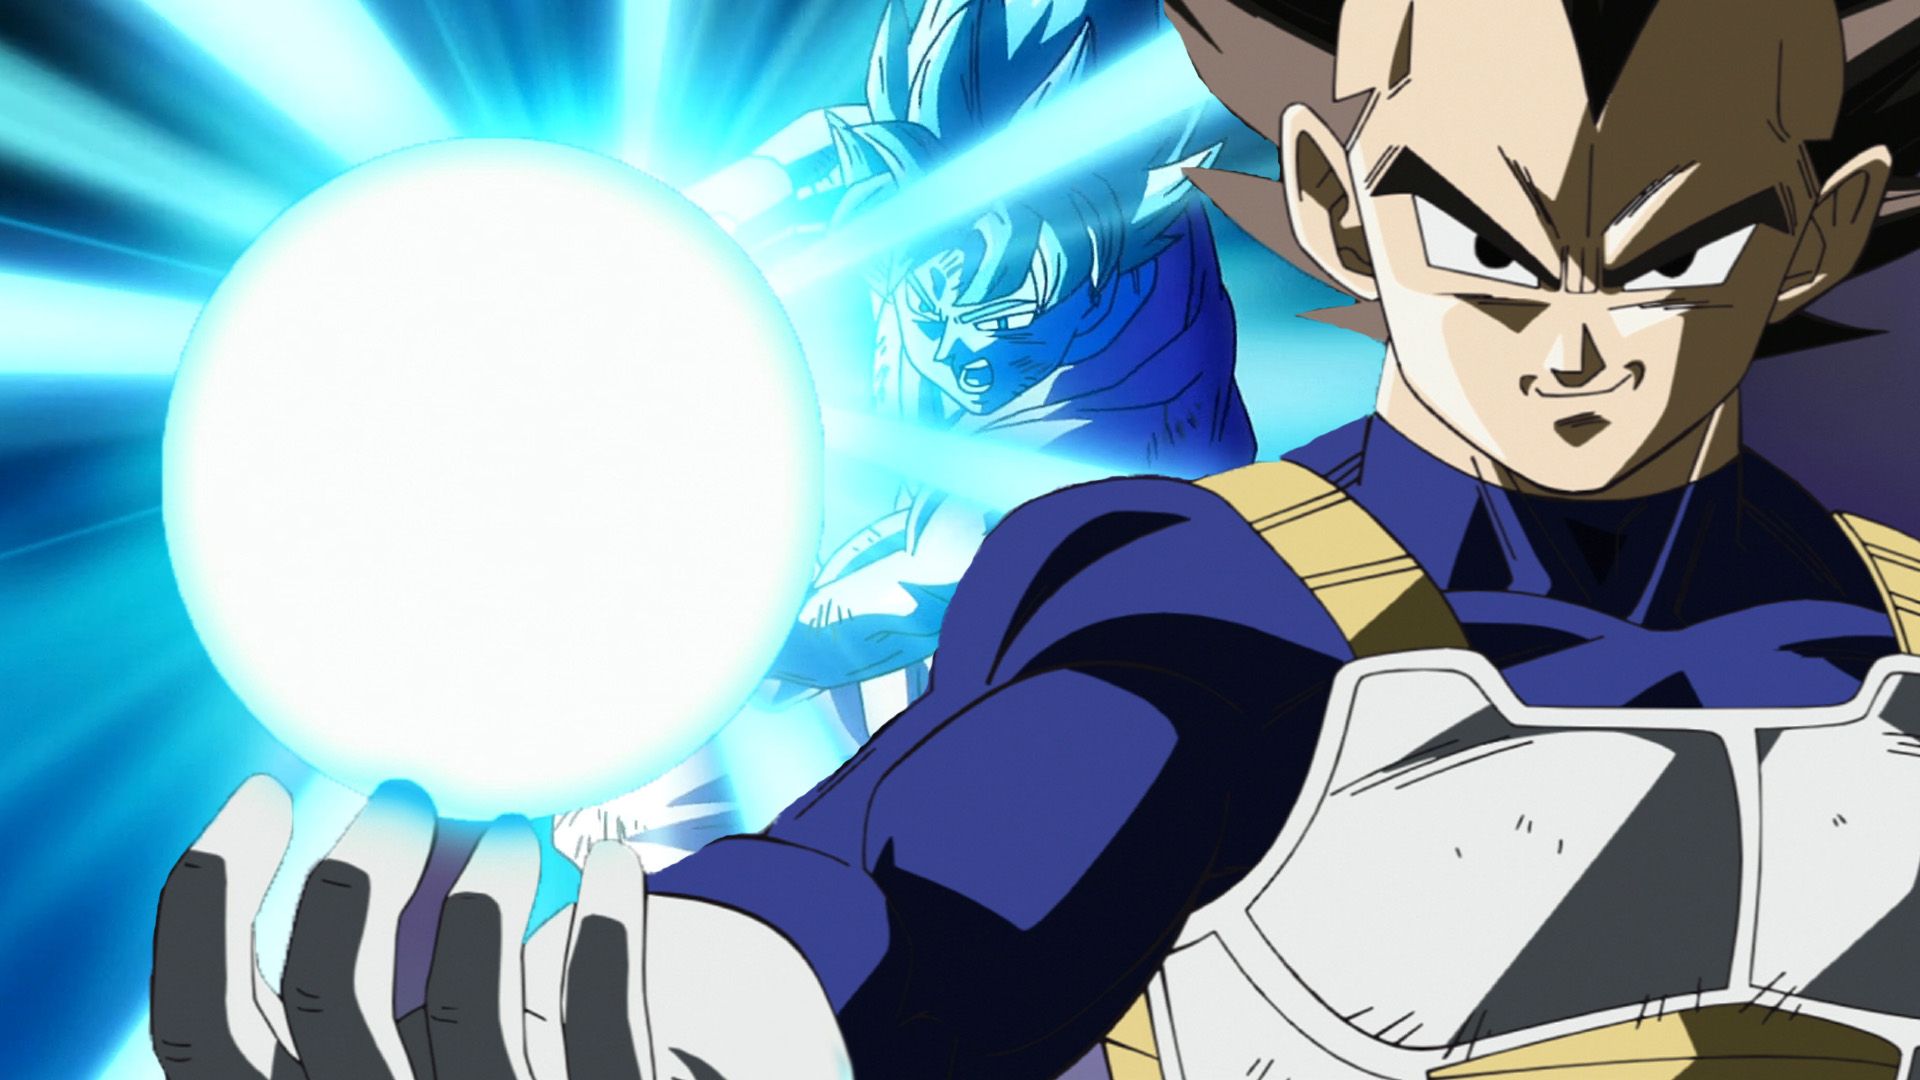 8 Anime characters with explosive abilities, ranked from most powerful to  least